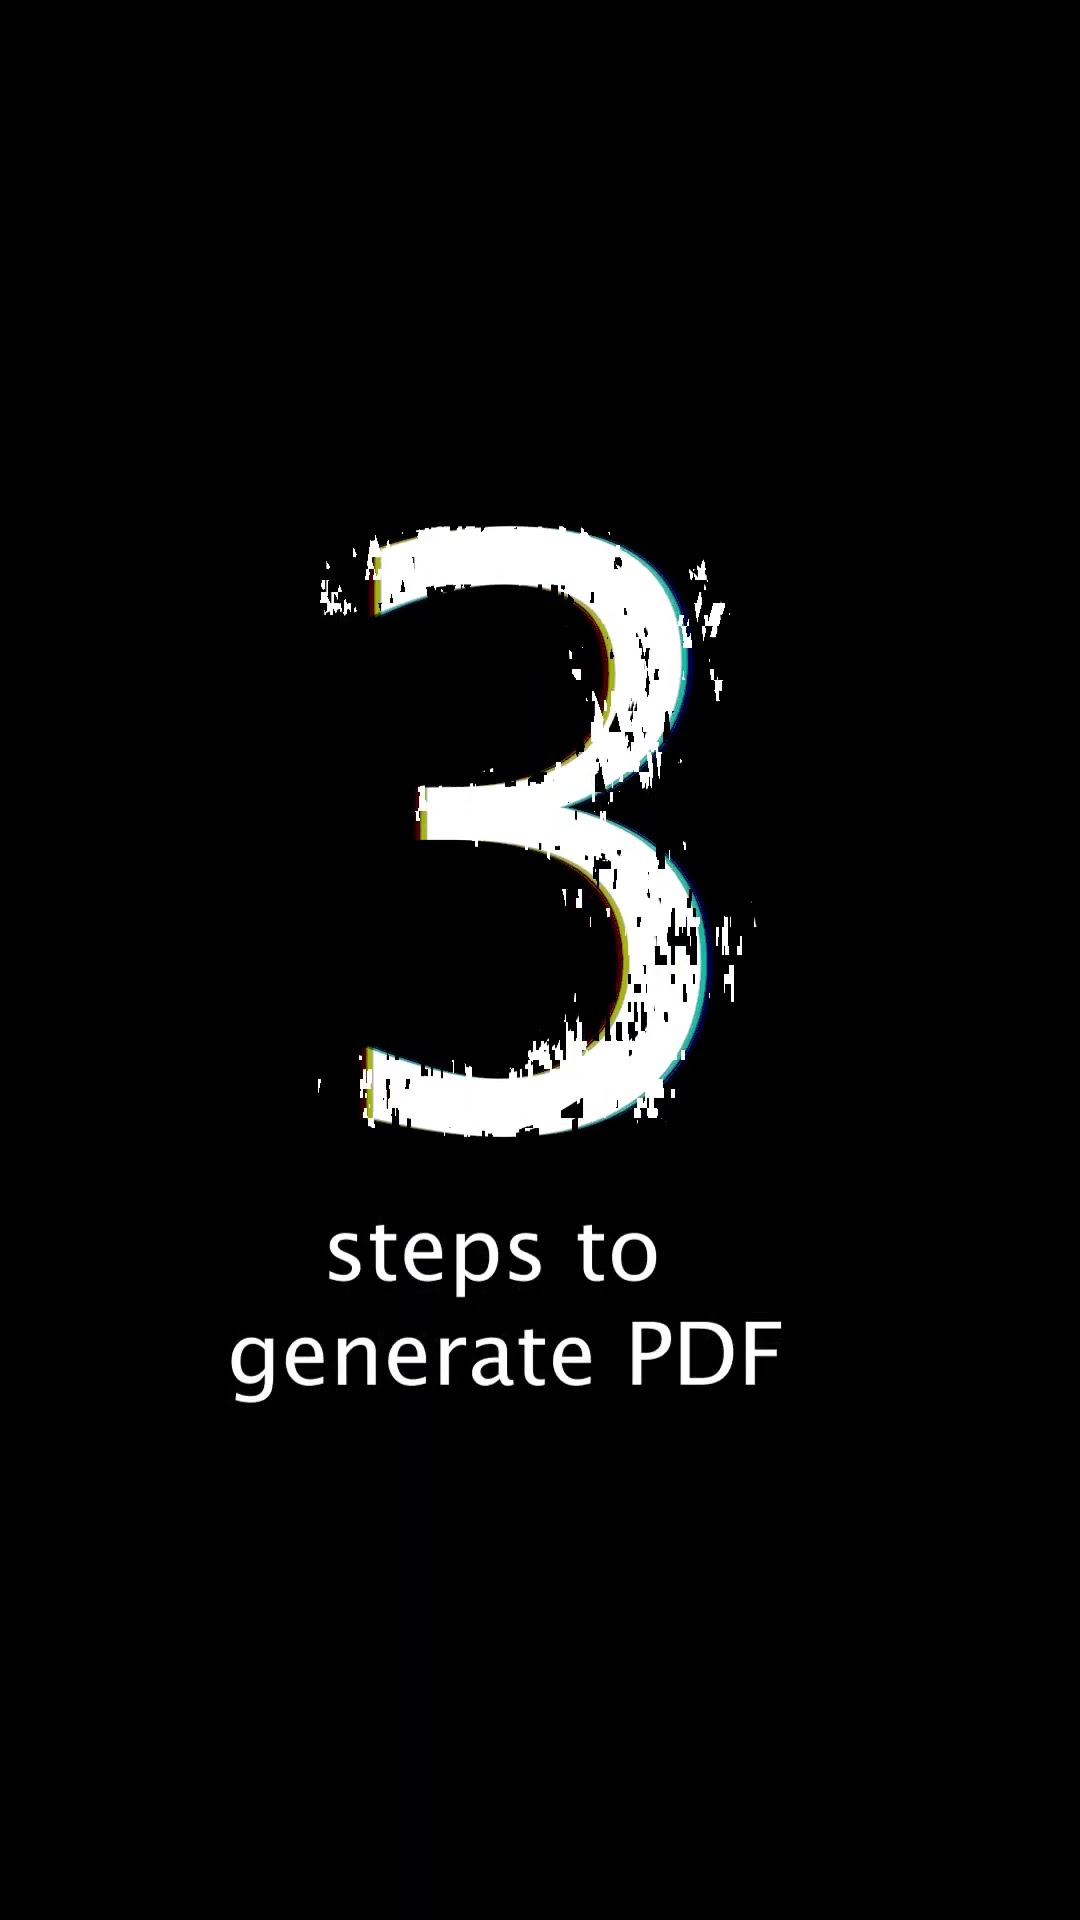 Easily generate PDFs on your website